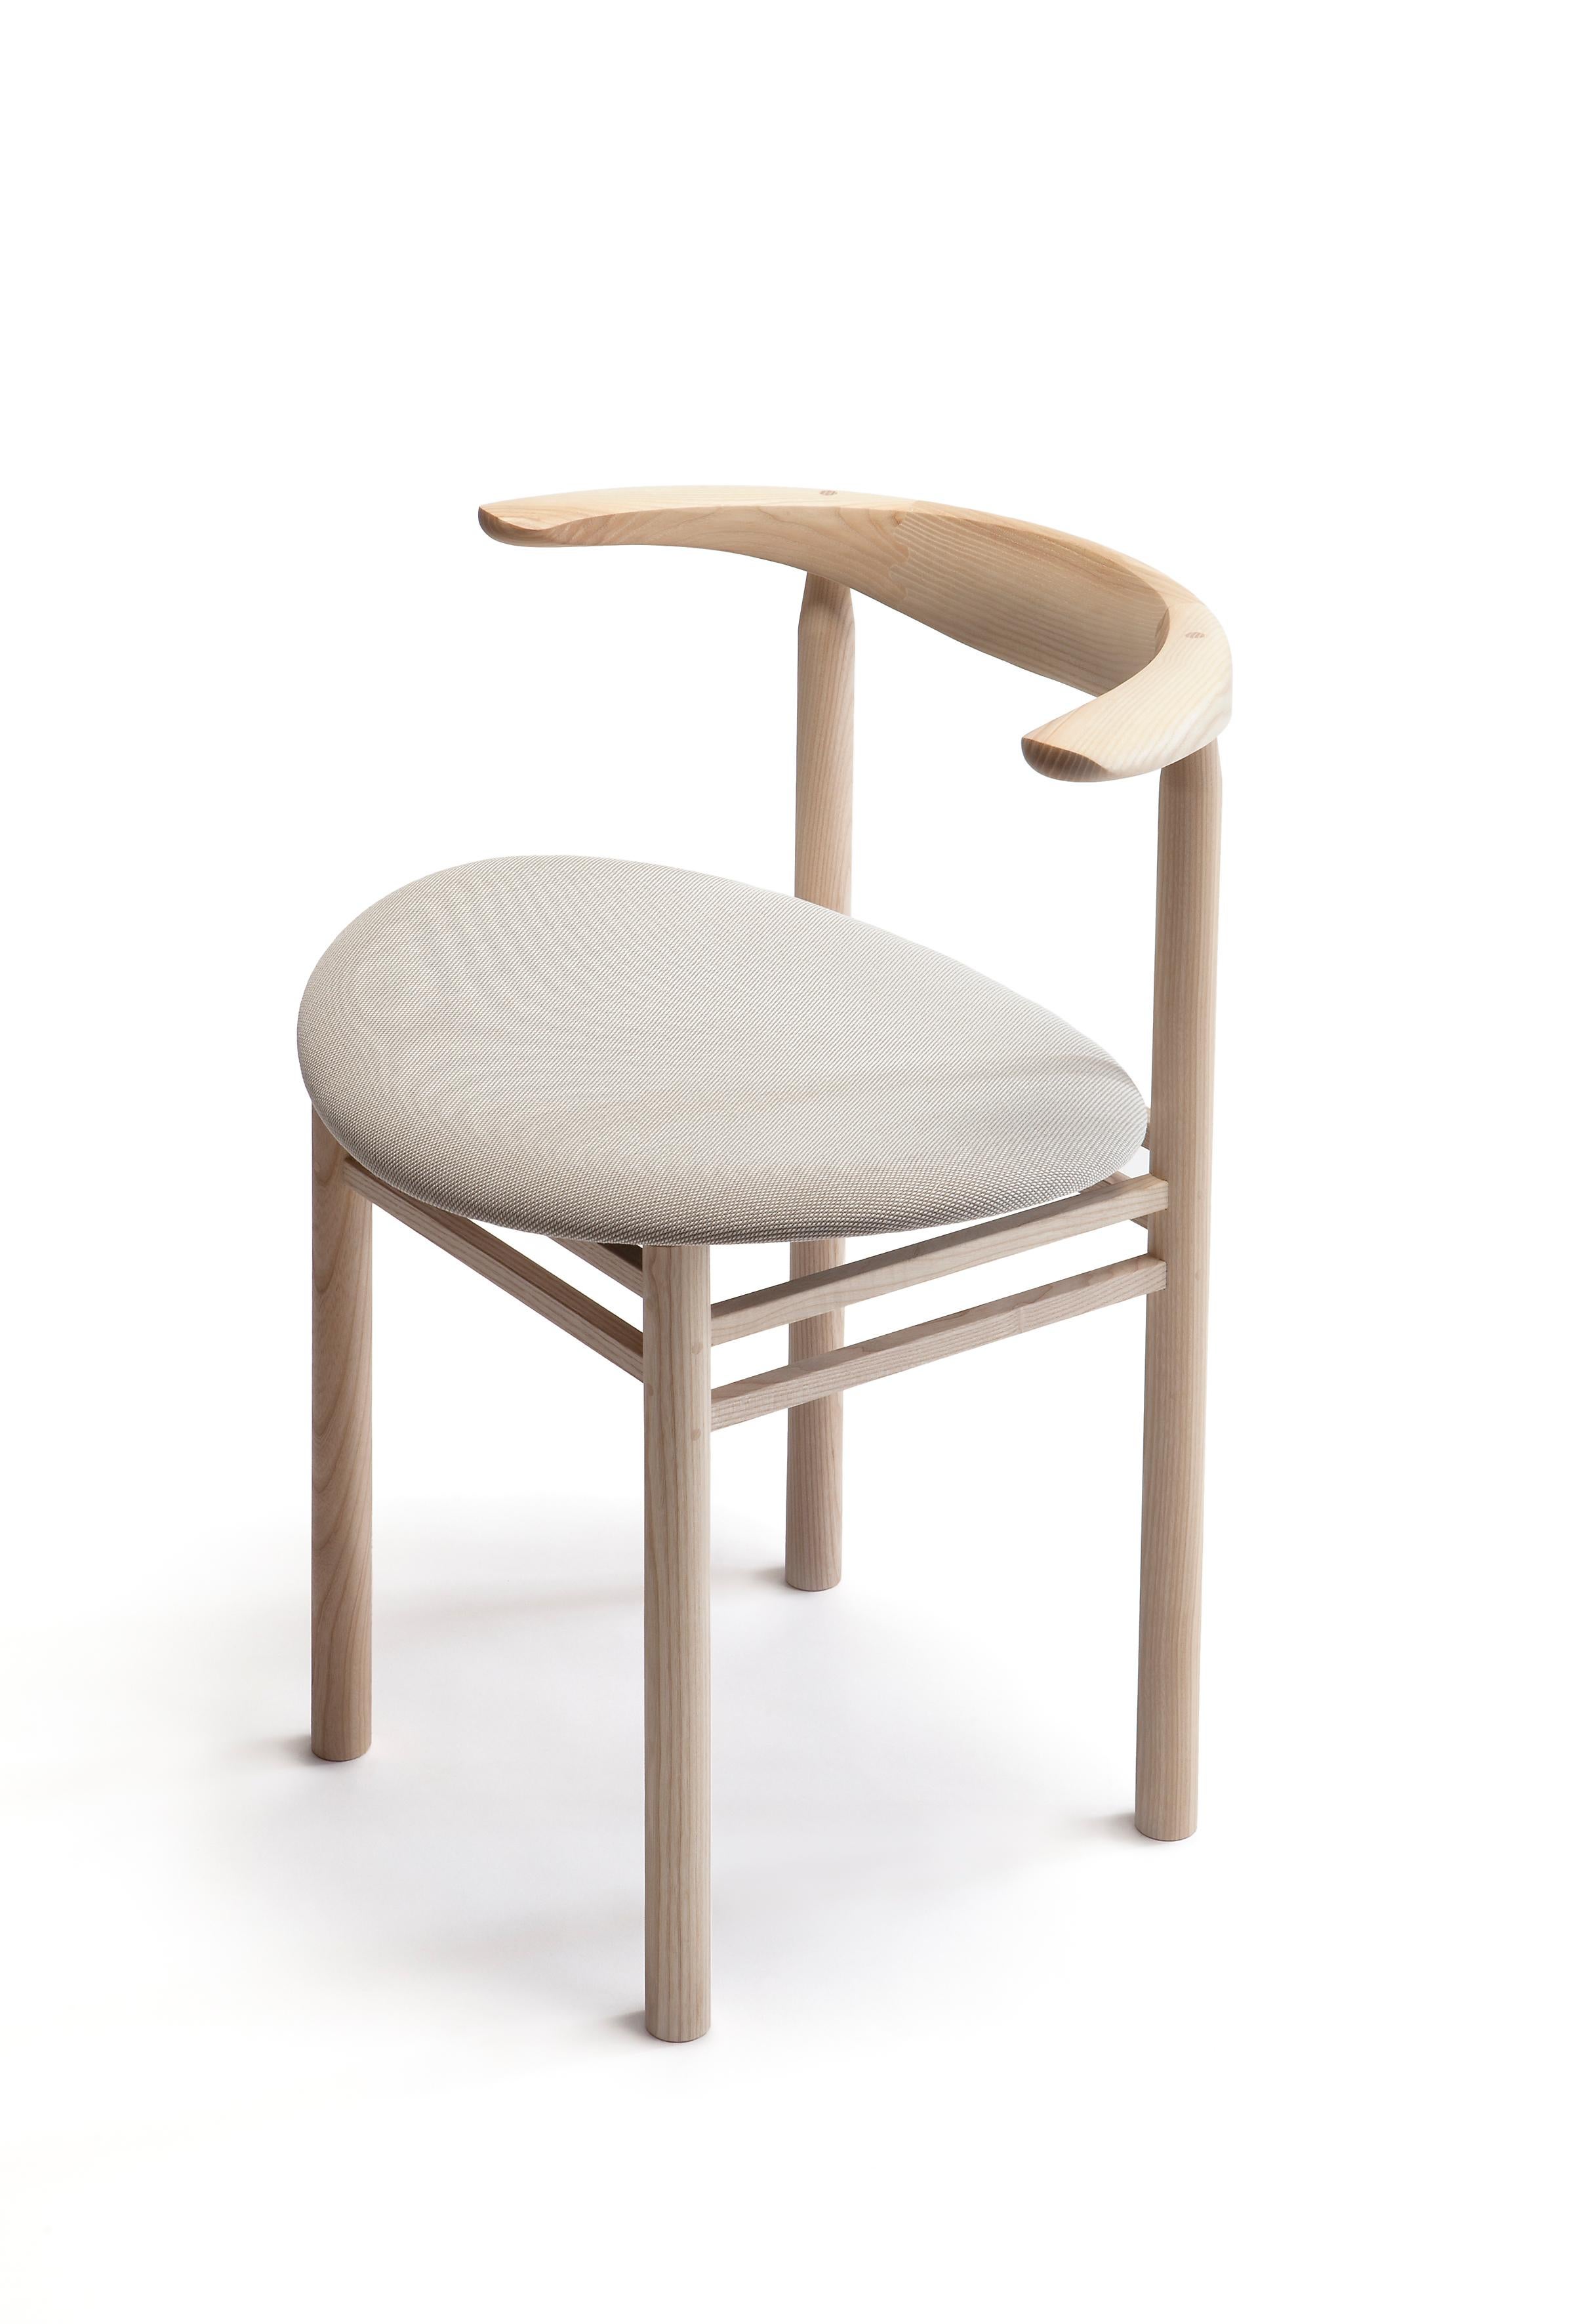 Linea RMT3 chair is designed by Rudi Merz in 2009. Its curved backrest enhances seating comfort. The seat is always upholstered, and the frame is from northern European ash. Wooden joints and nails are visually beautiful and structurally